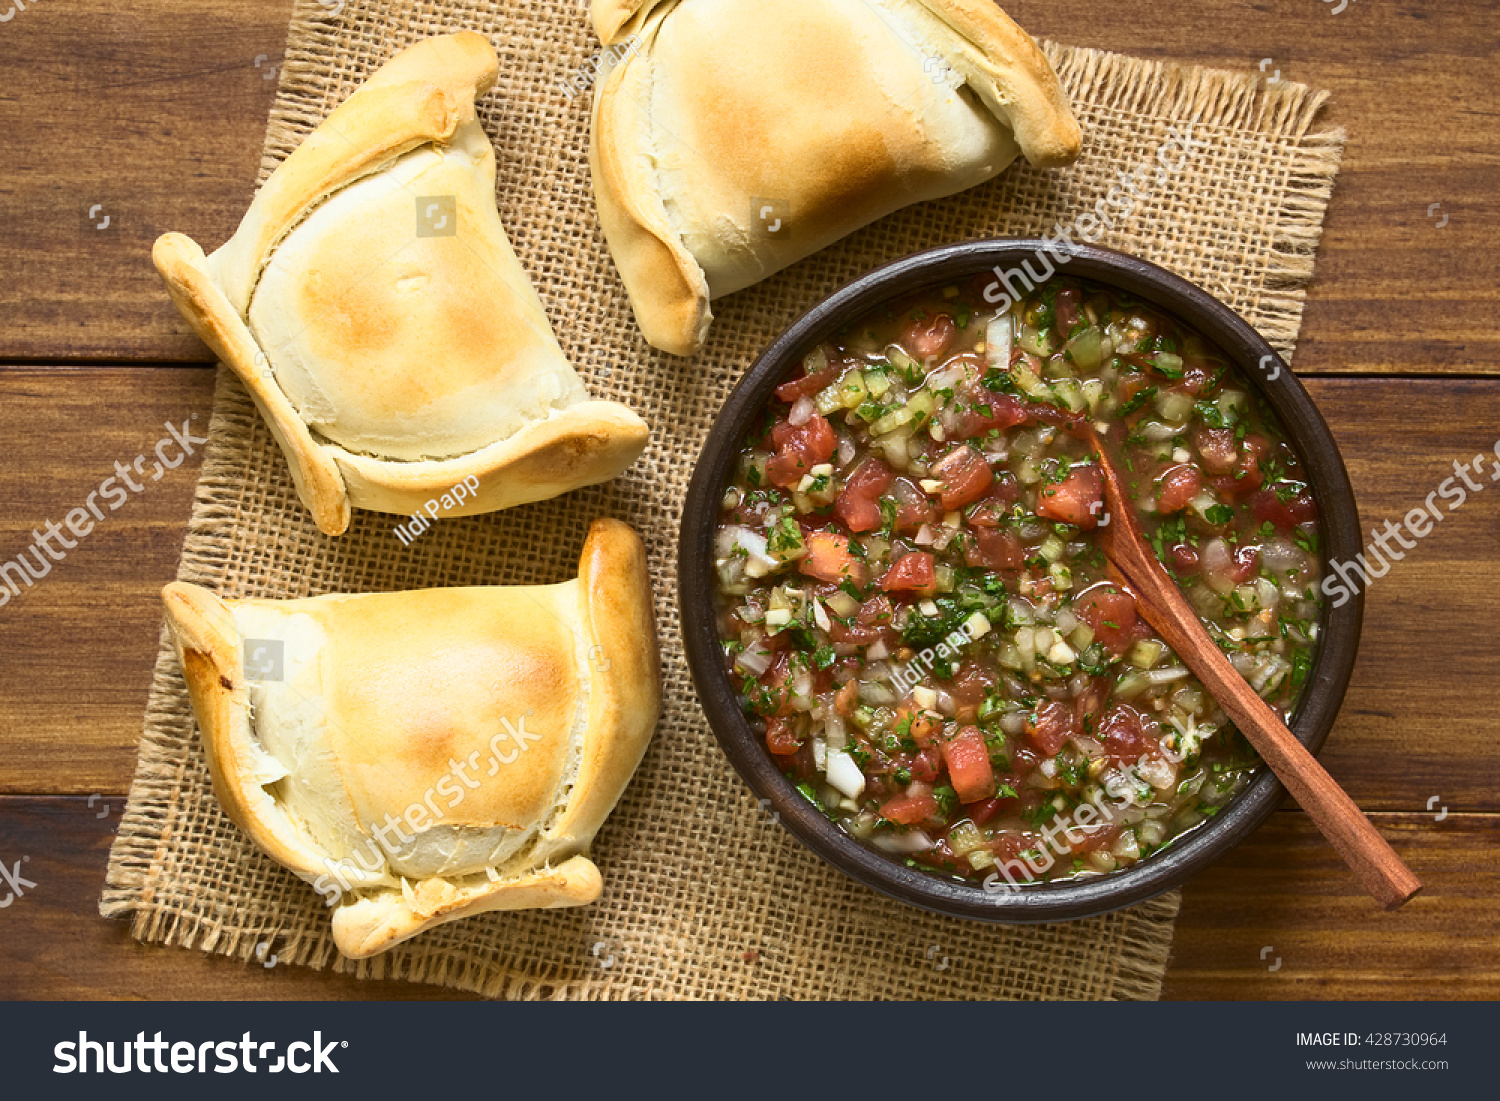 Chilean Pebre sauce, a traditional condiment made of tomato, onion, garlic, spicy aji pepper and coriander with empanadas on the side, photographed overhead on dark wood with natural light #428730964